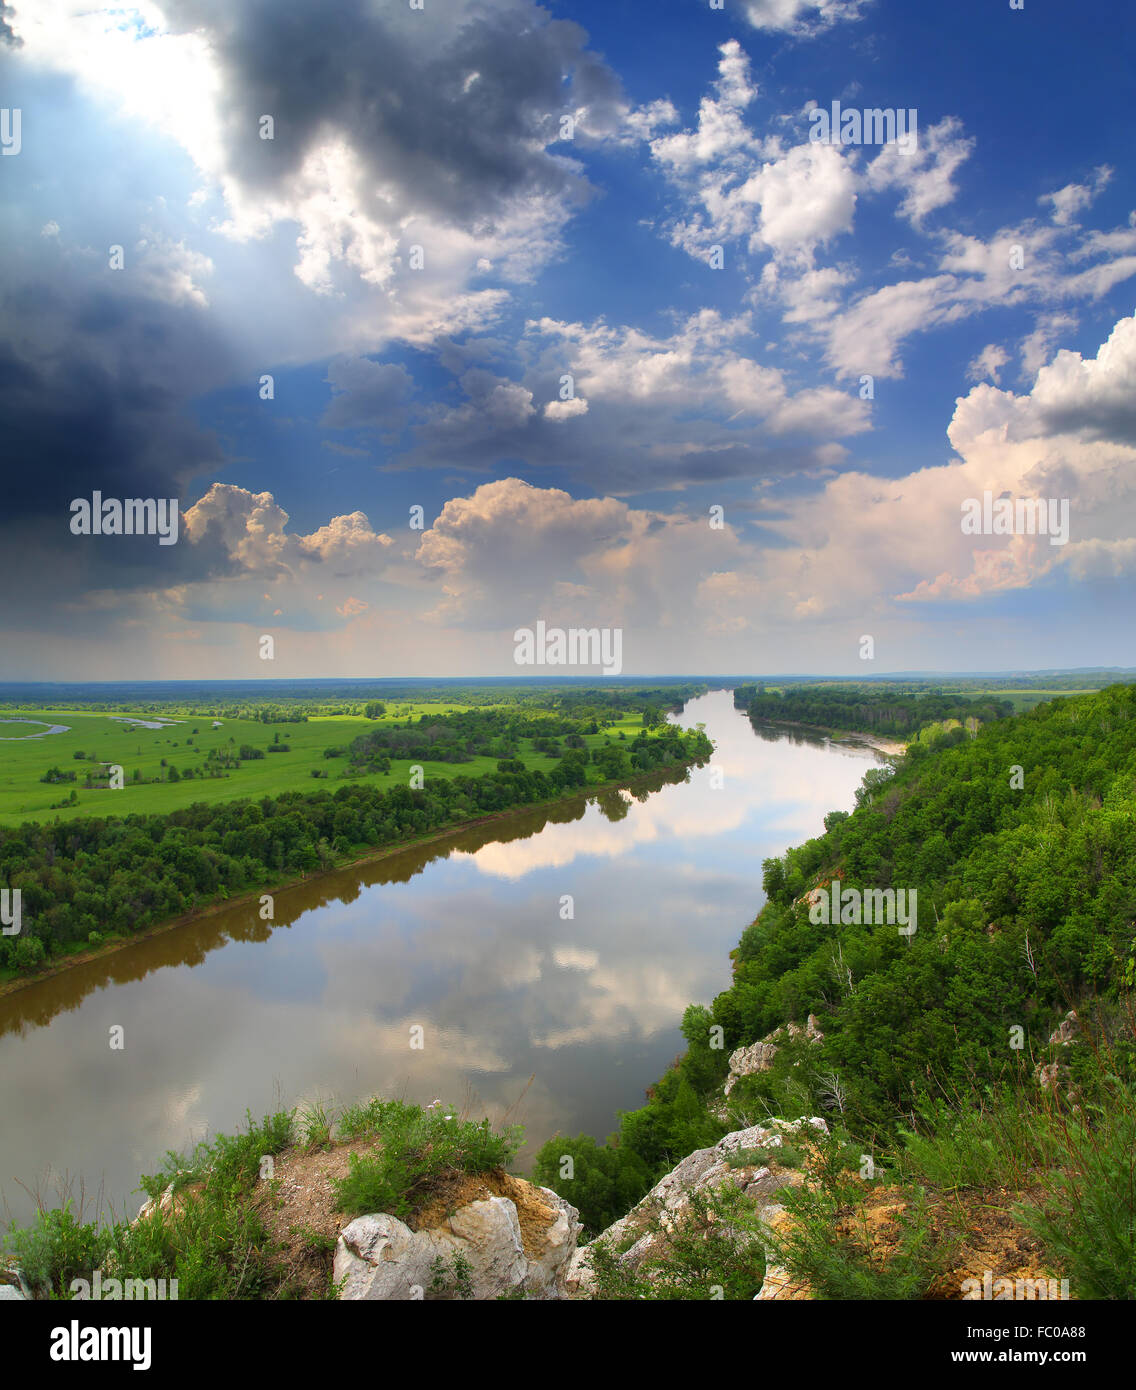 landscape with river and rain on horizon Stock Photo